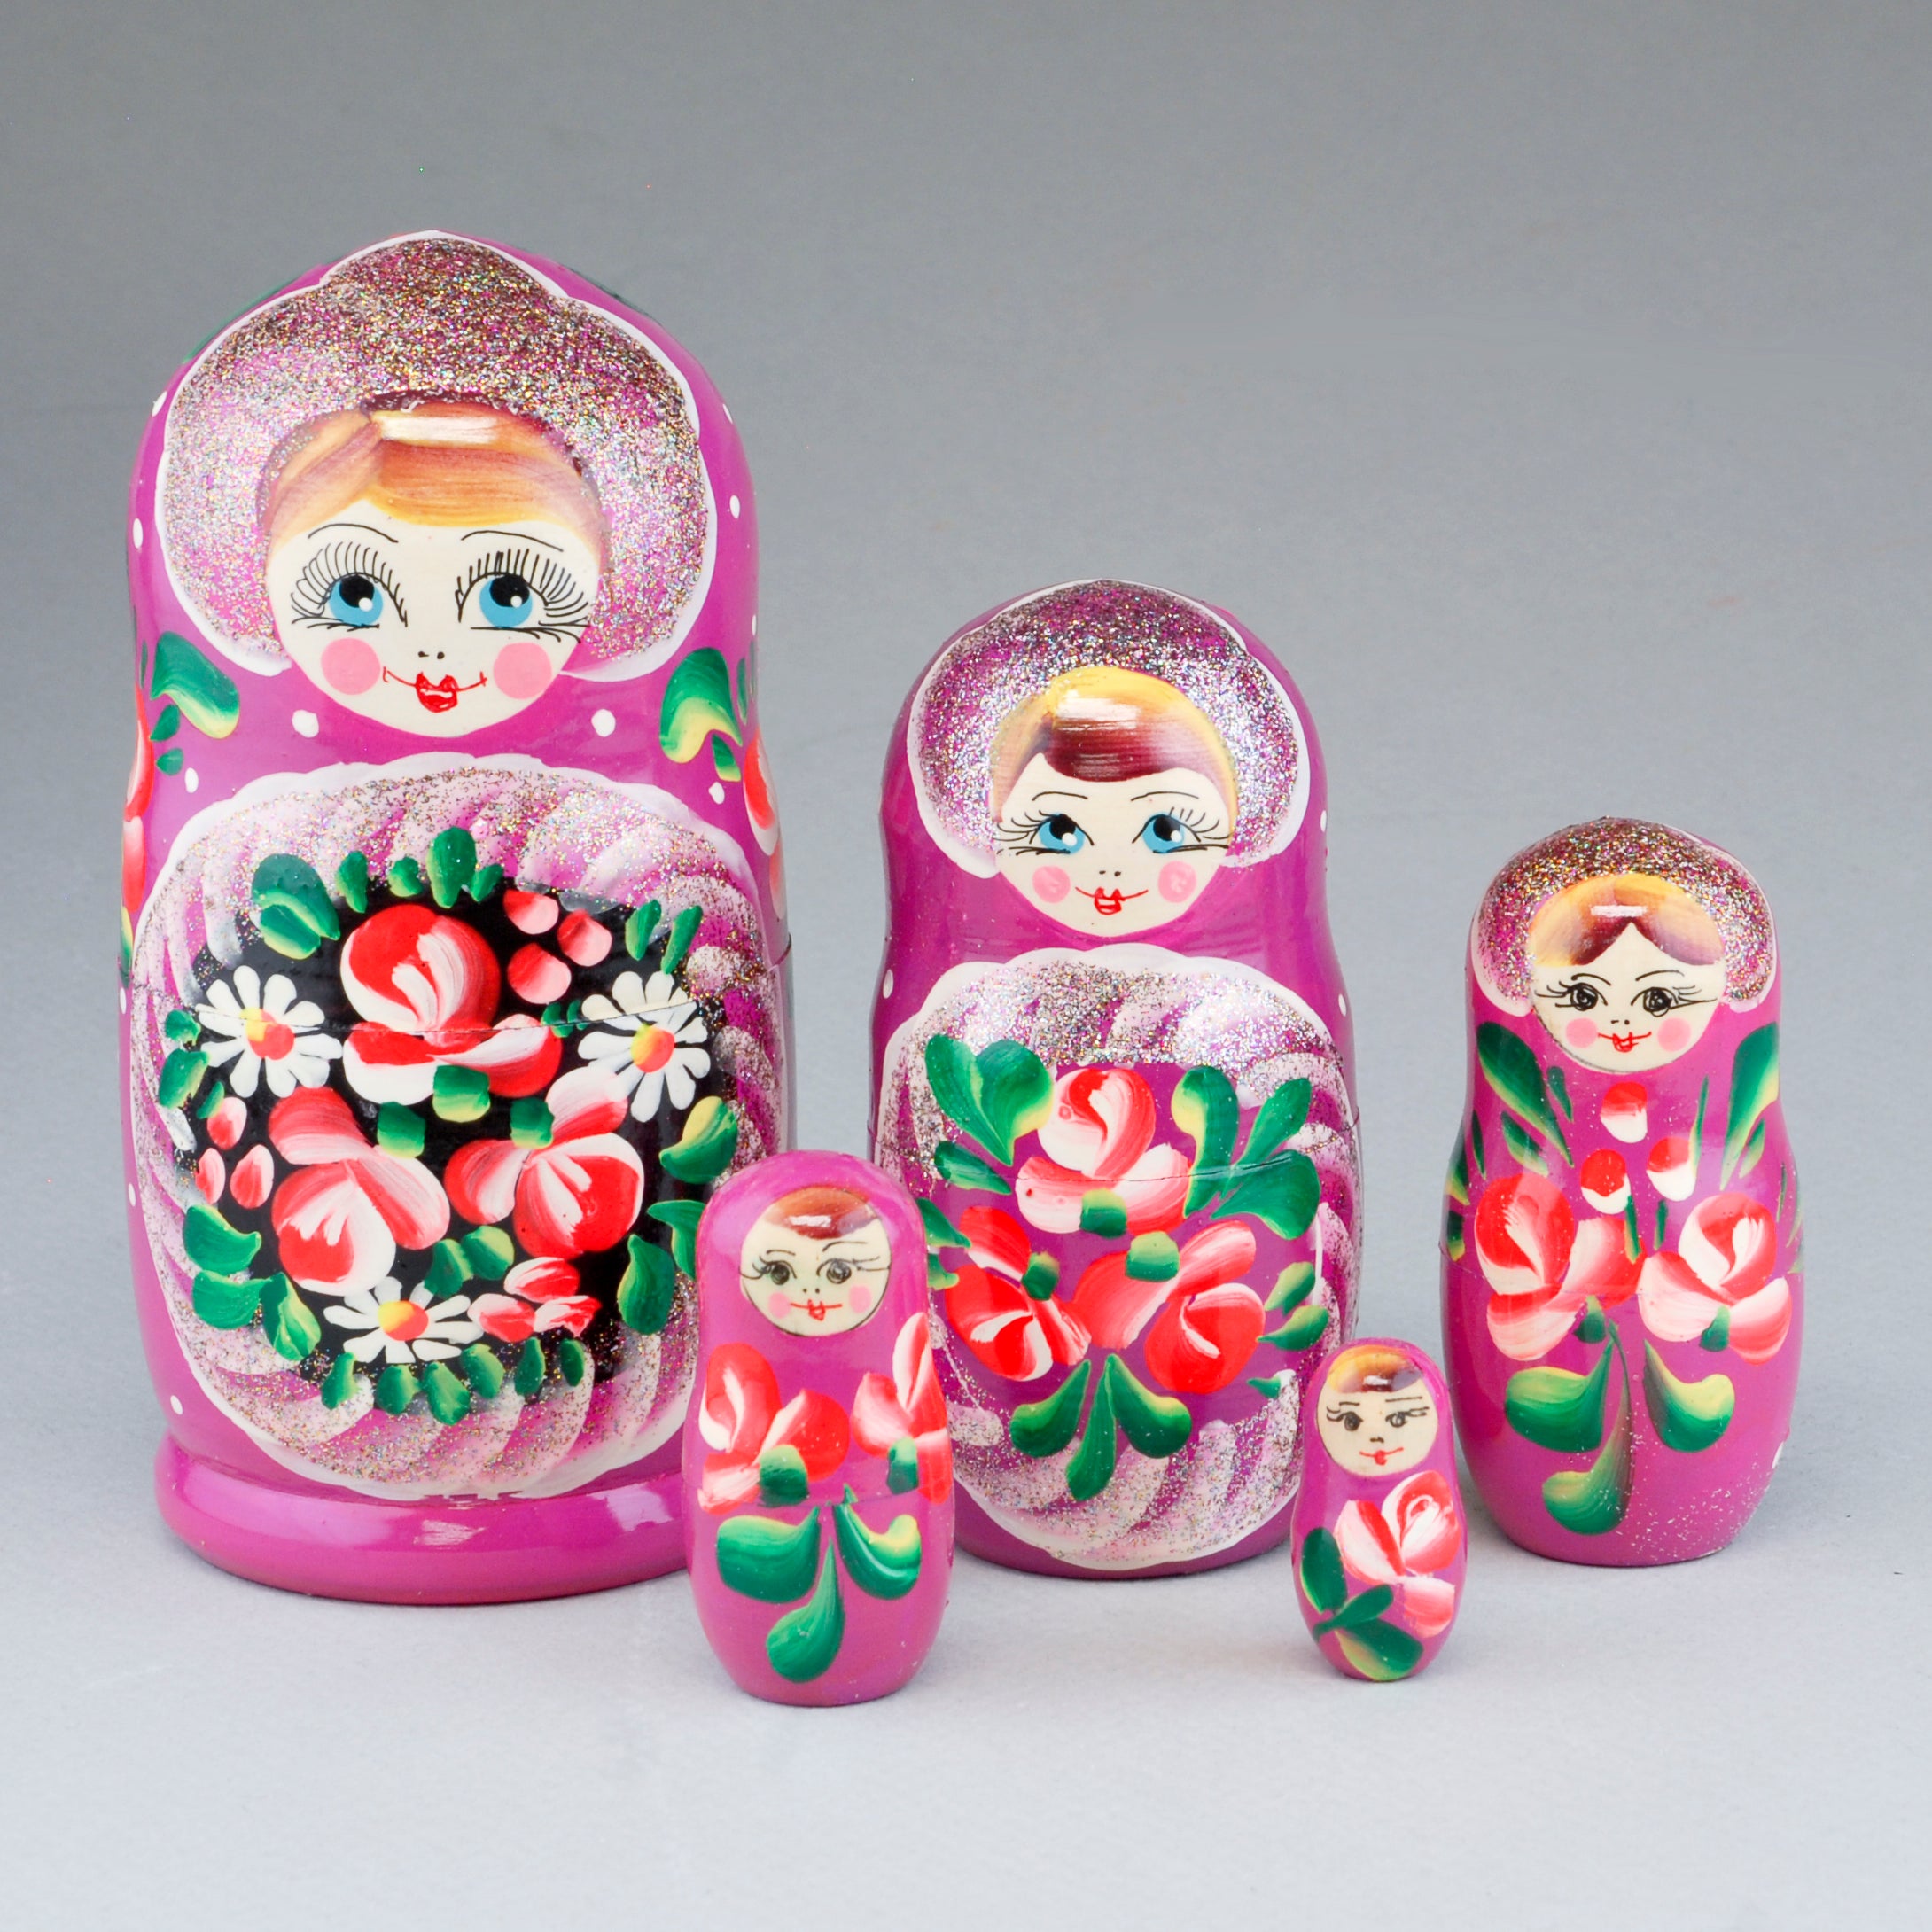 5 Piece Wooden Nesting Doll, Colorful with Glitter 7"